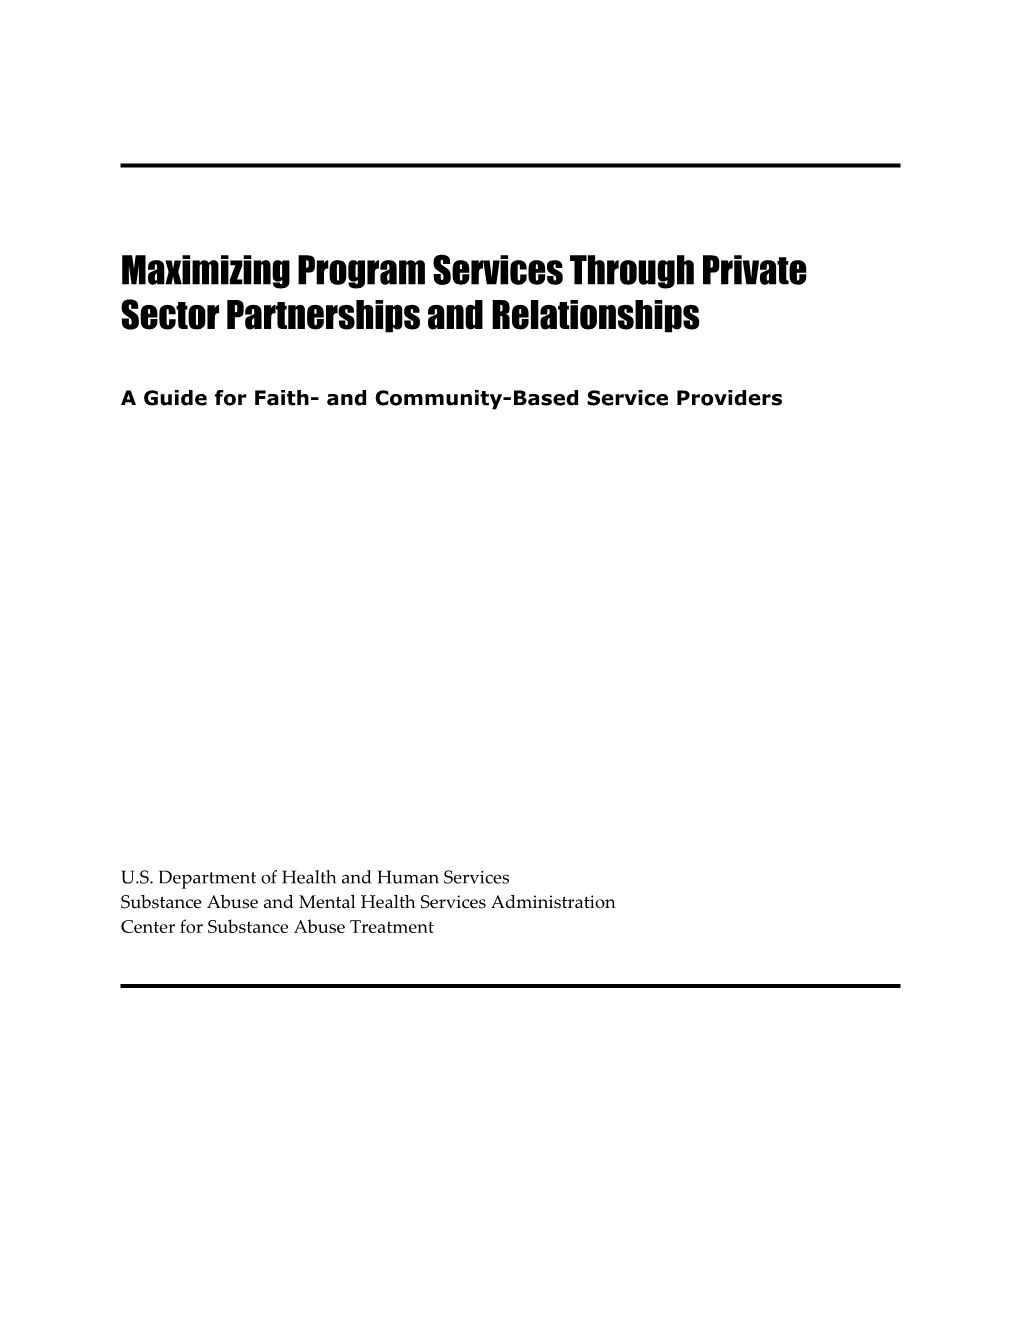 A Guide for Faith- and Community-Based Service Providers